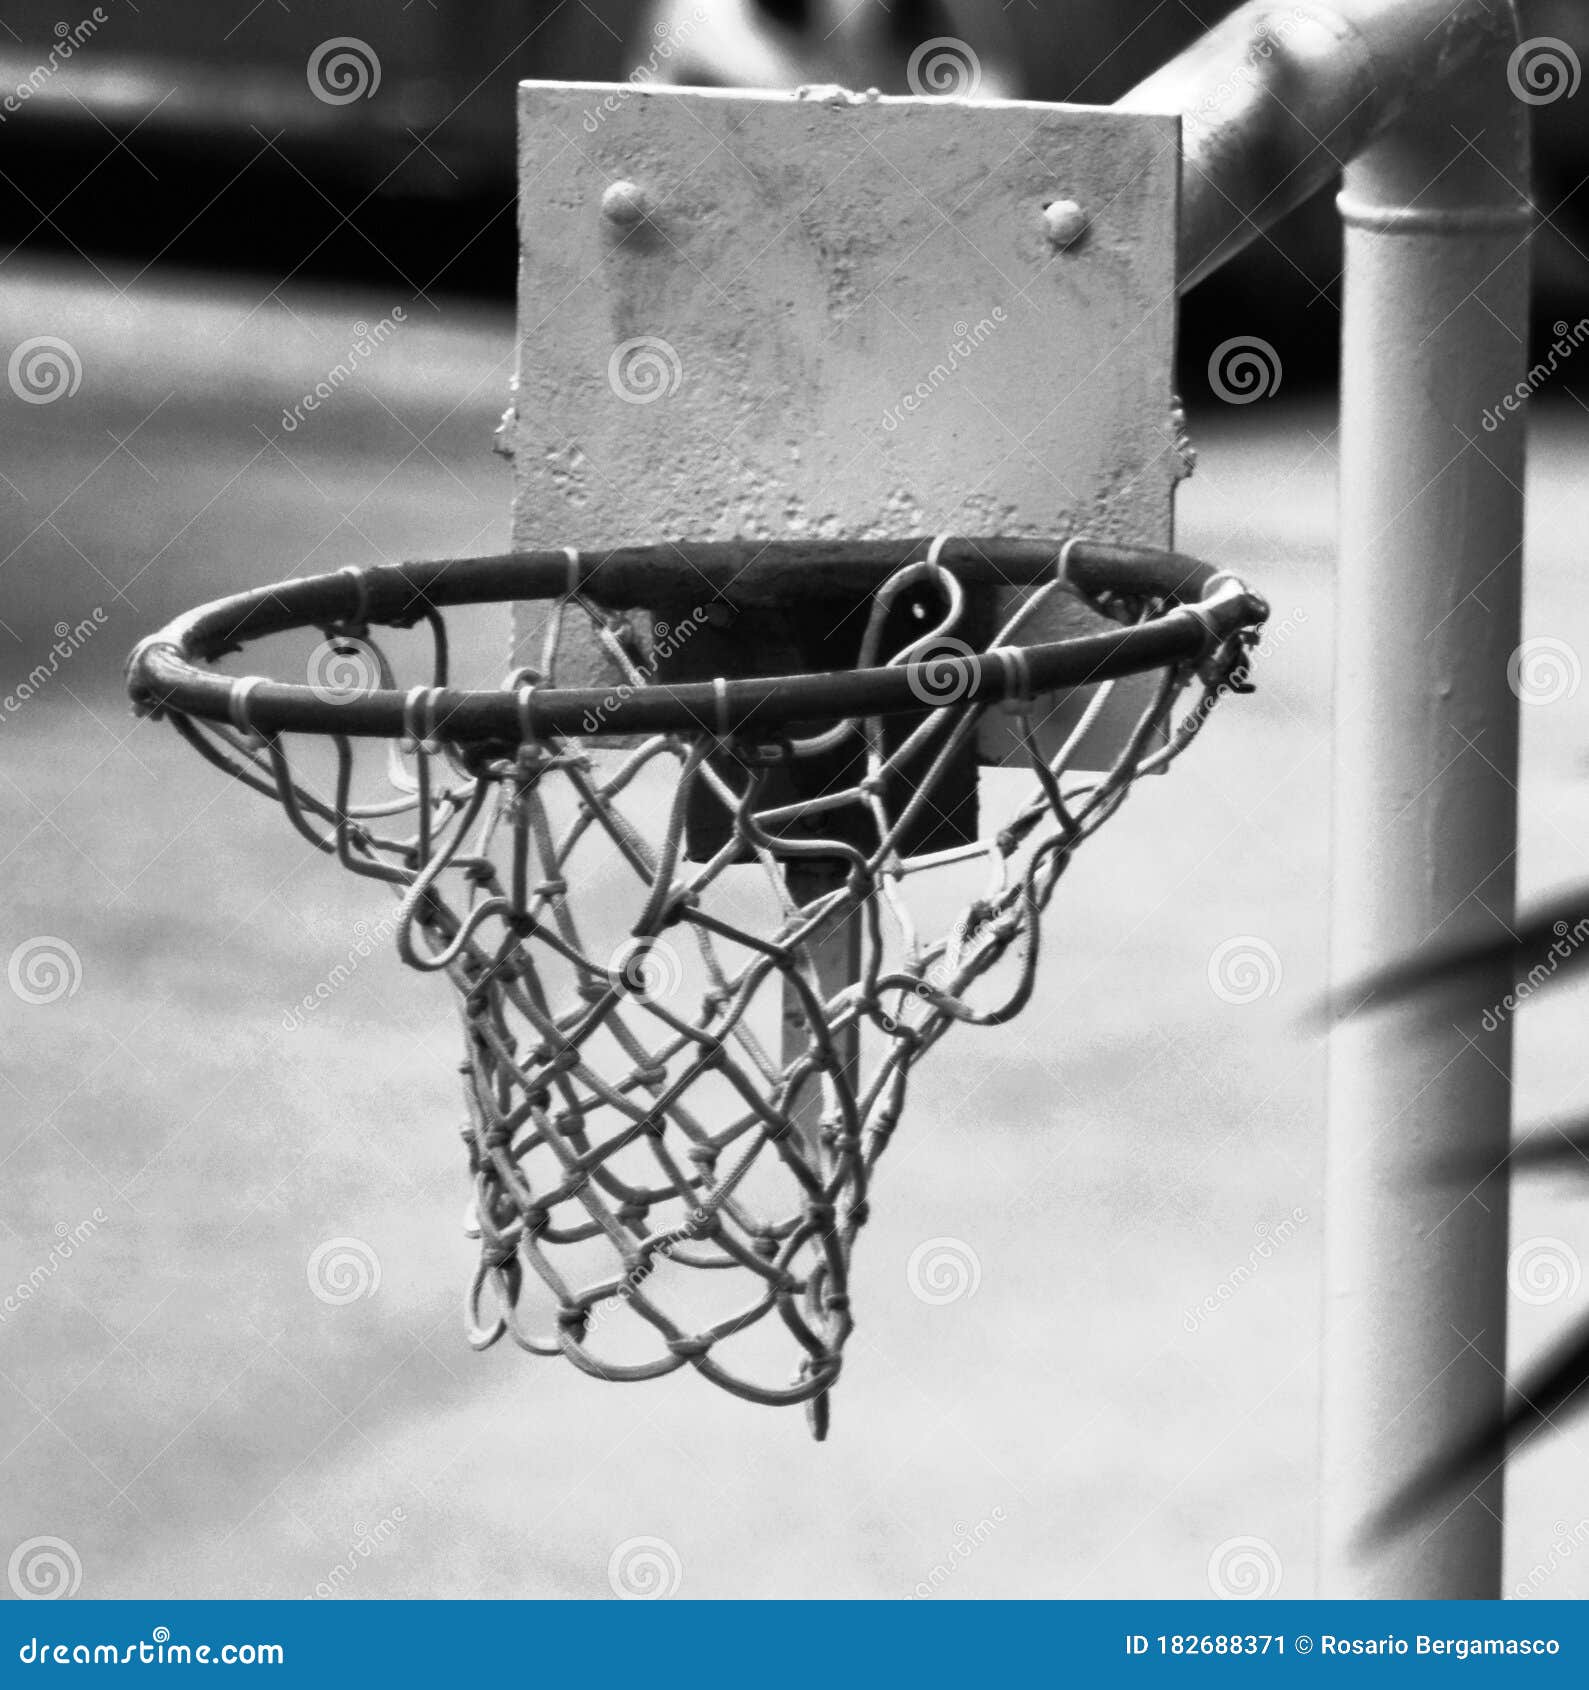 Basketbaal Hoop Player Score Game Play Stock Image - Image of game ...